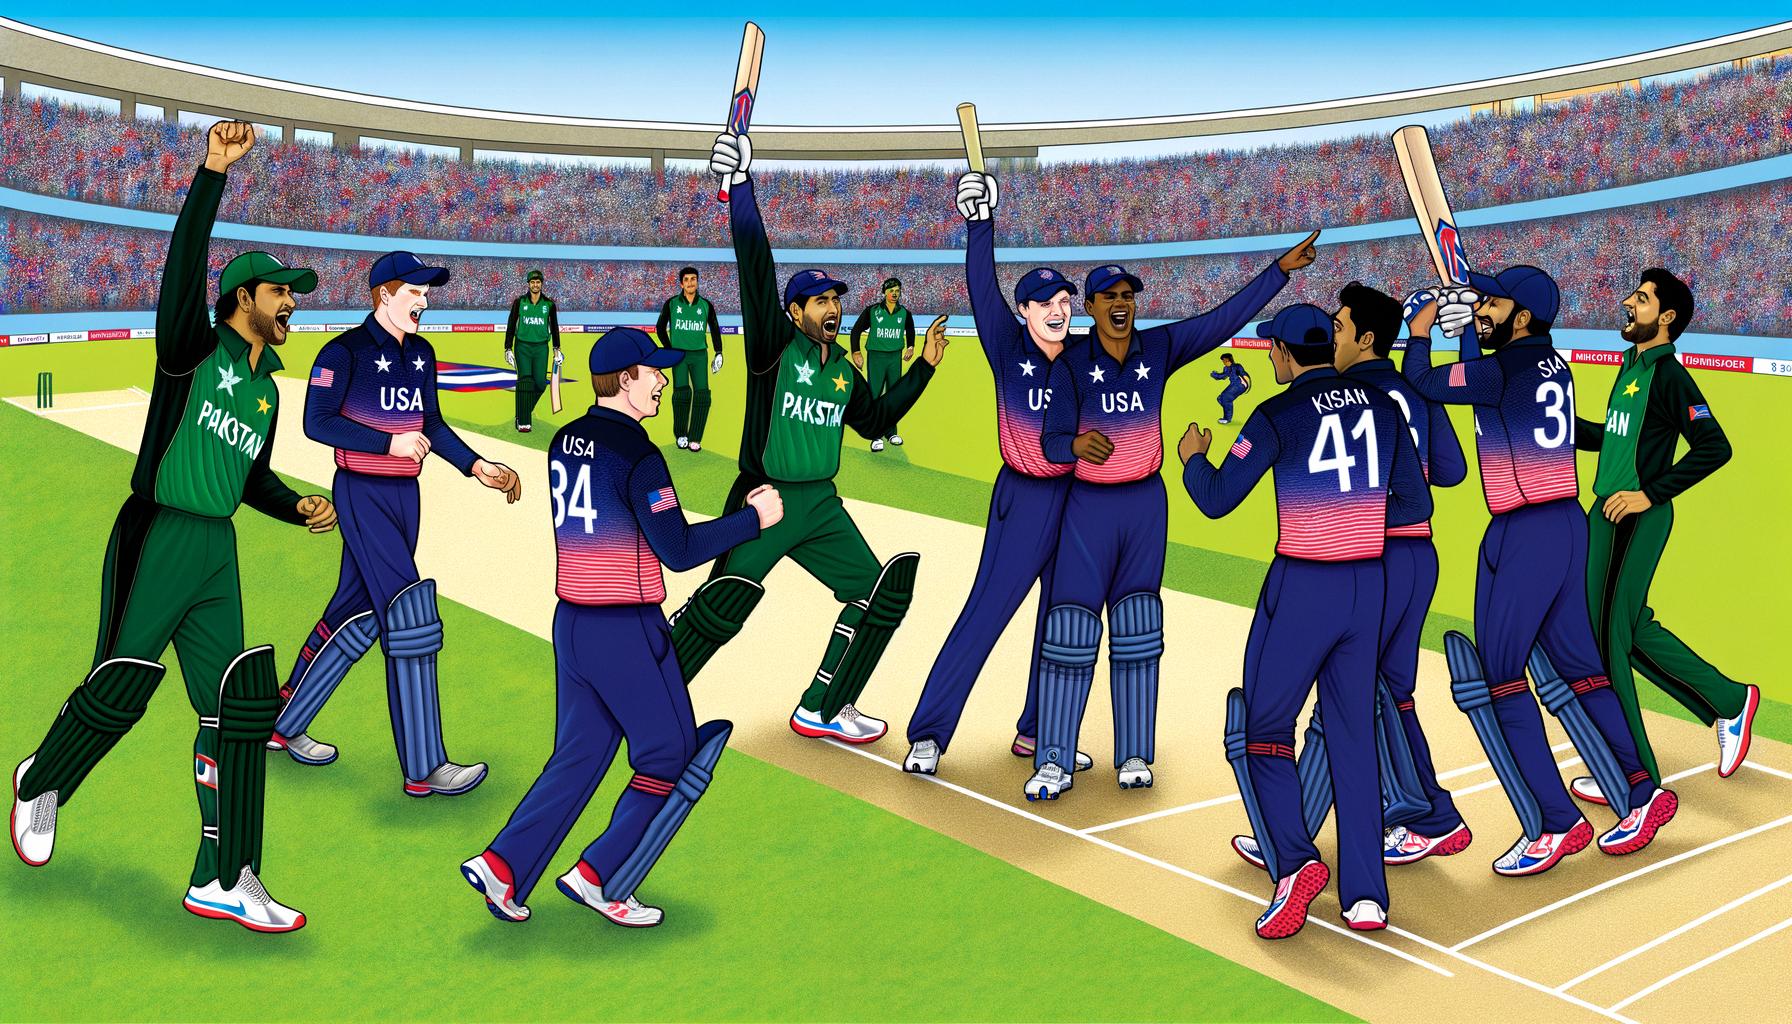 USA's historic cricket win over Pakistan in T20 World Cup.